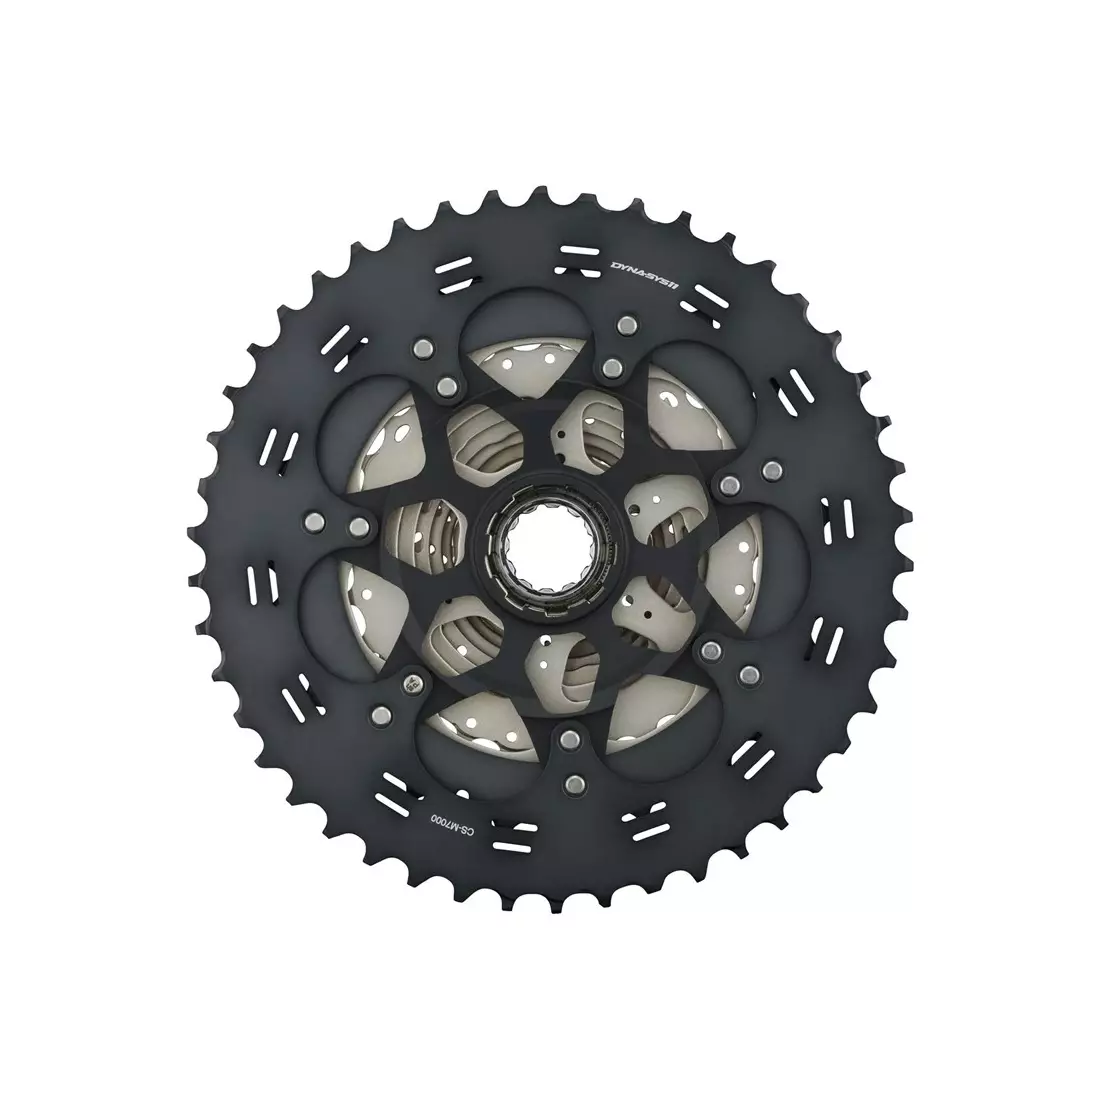 SHIMANO CS-M7000 bicycle cassette 11-speed 11-46T